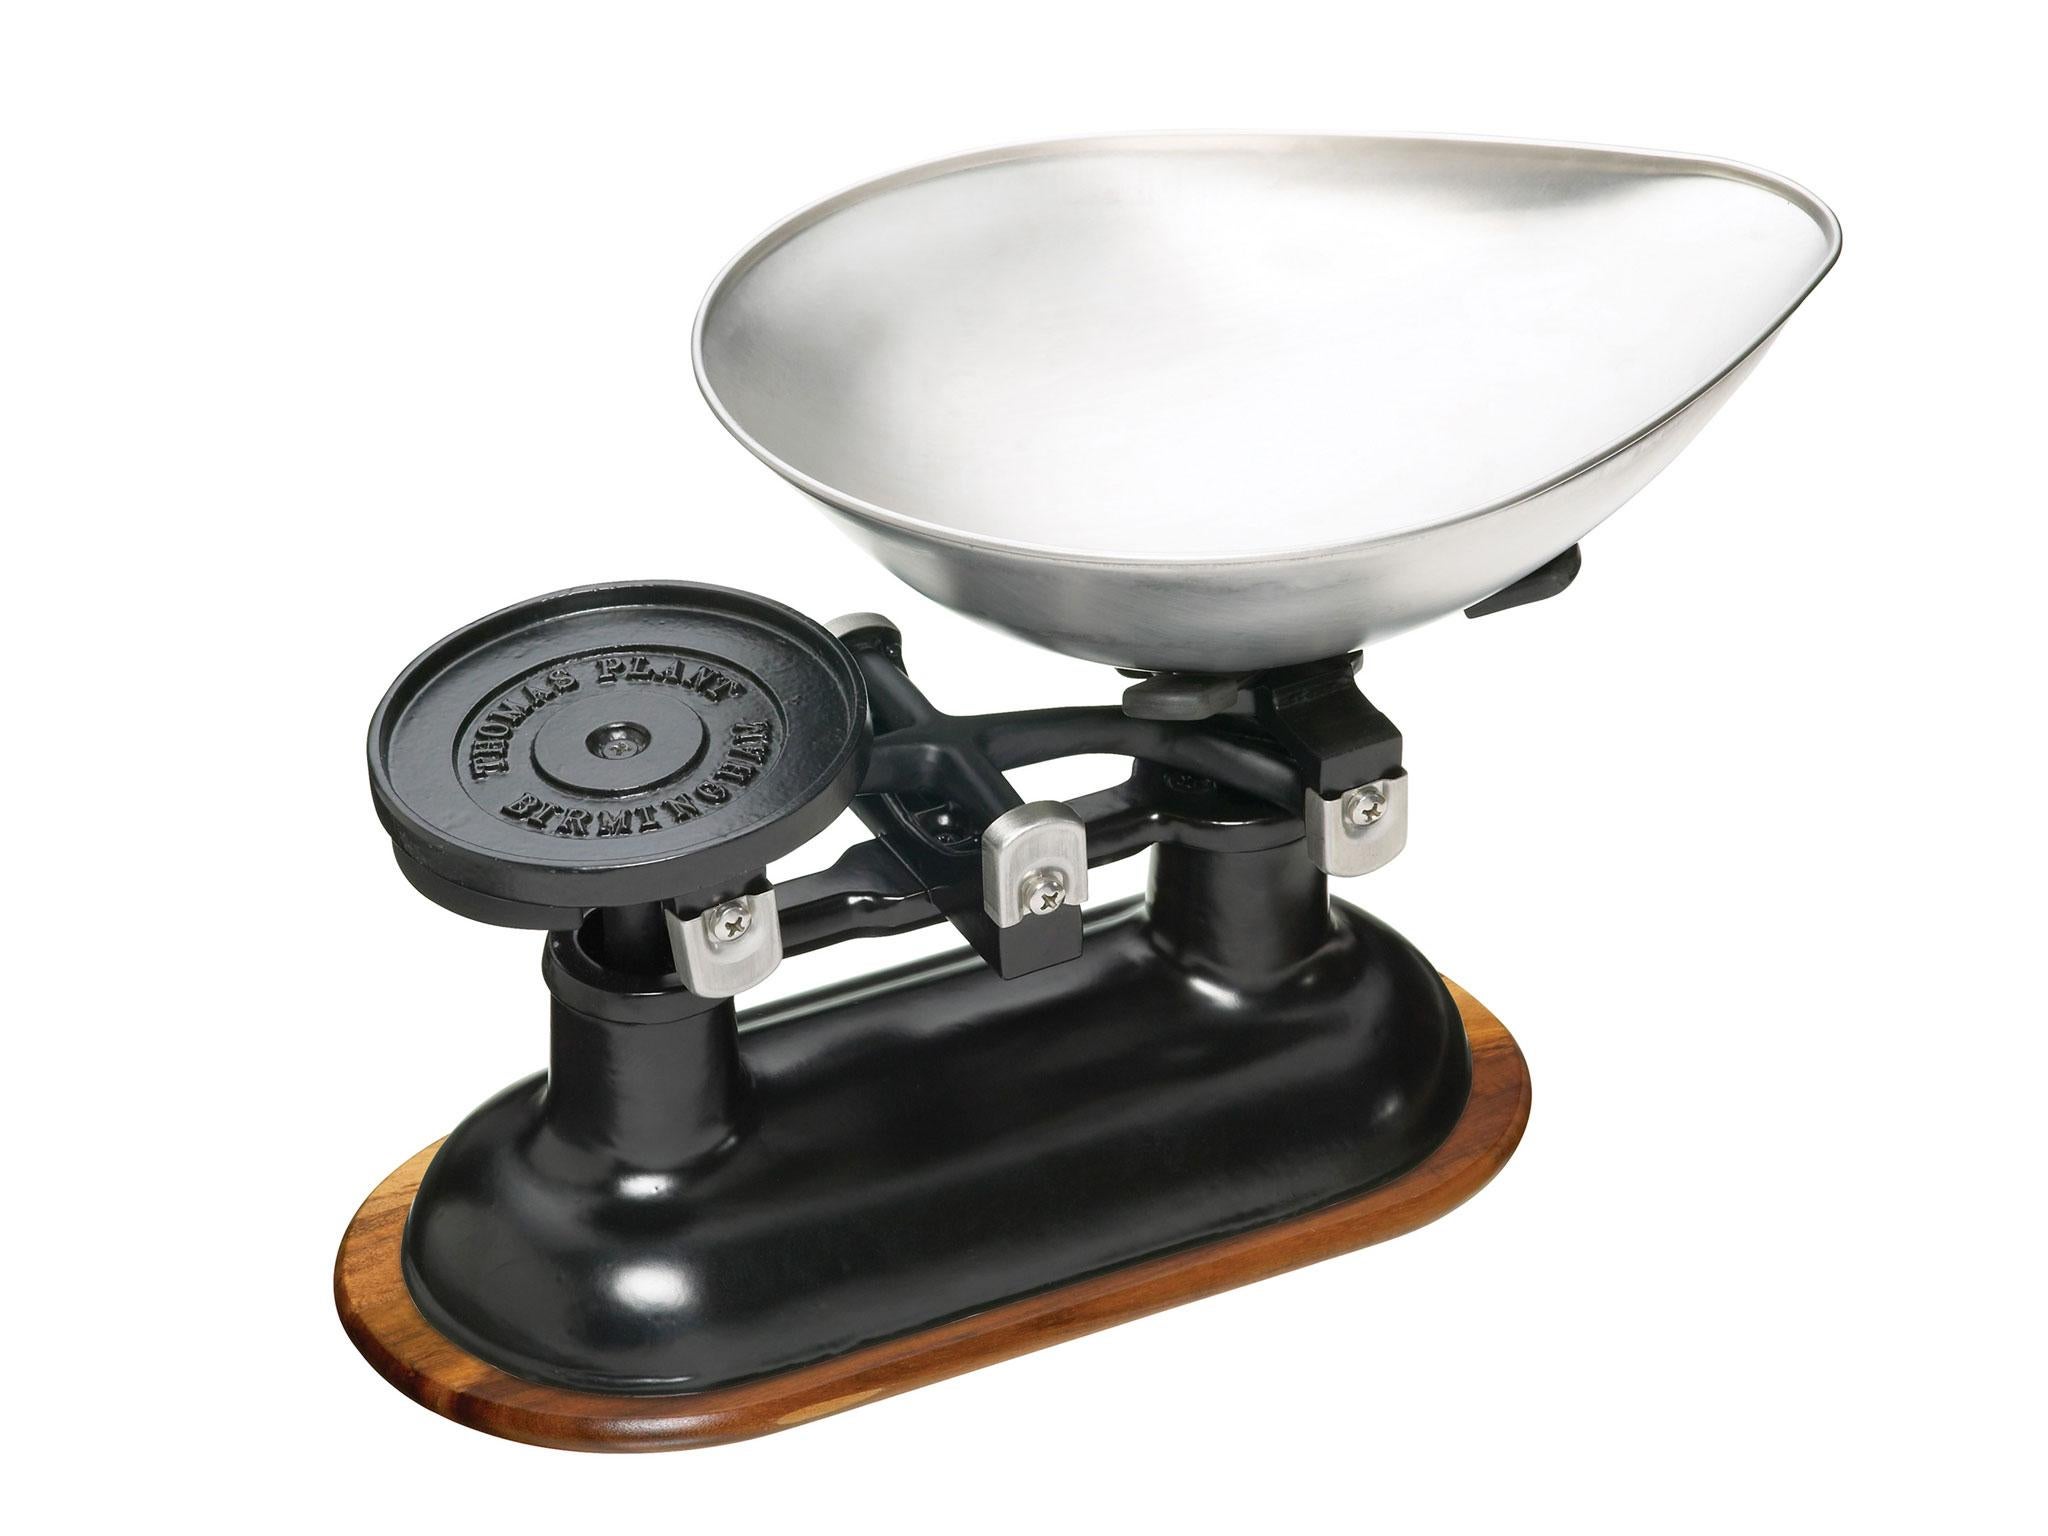 BALANCE SCALES CAST IRON SET OF 5 RESTAURANT WEIGHT SCALES 